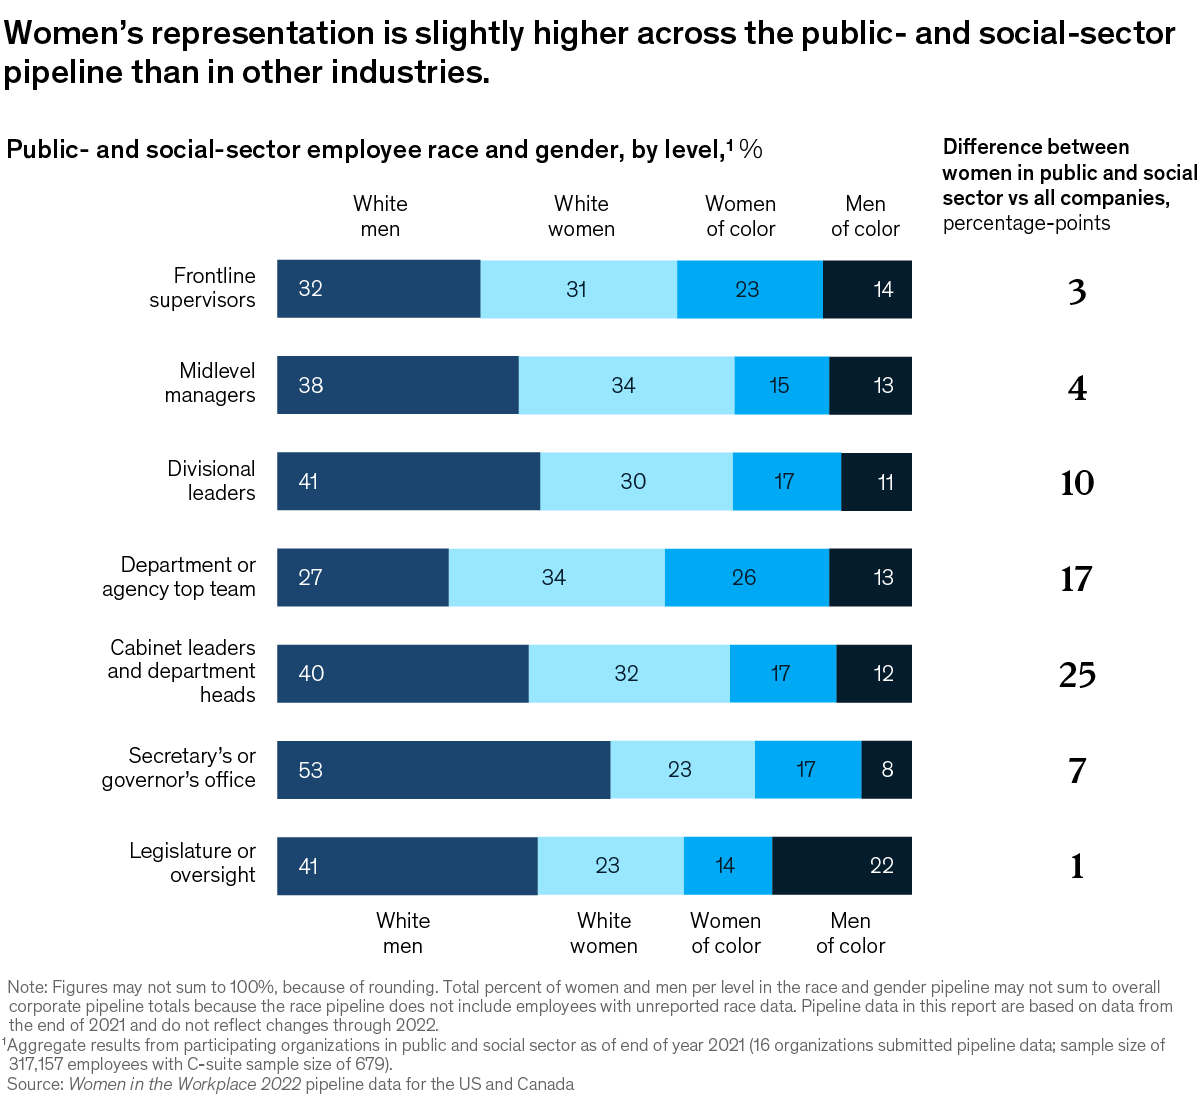 A chart titled “Public- and social-sector employee race and gender, by level” Click to open the full article on McKinsey.com.